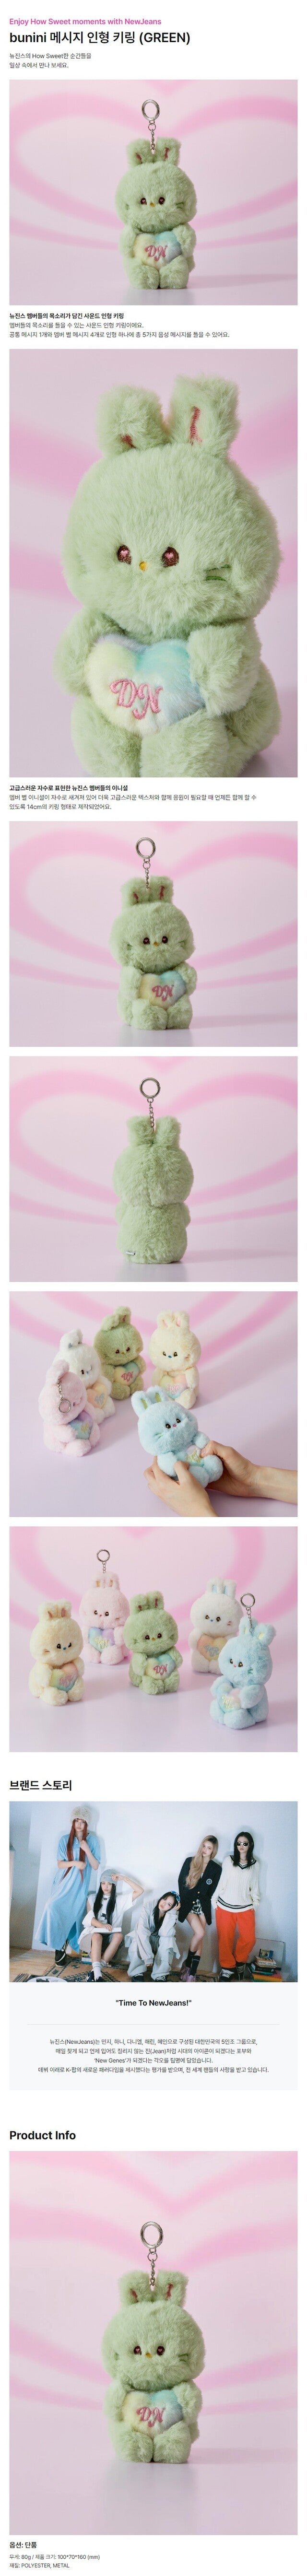 [PREORDER] NEW JEANS - BUNINI MESSAGE PLUSH KEYRING